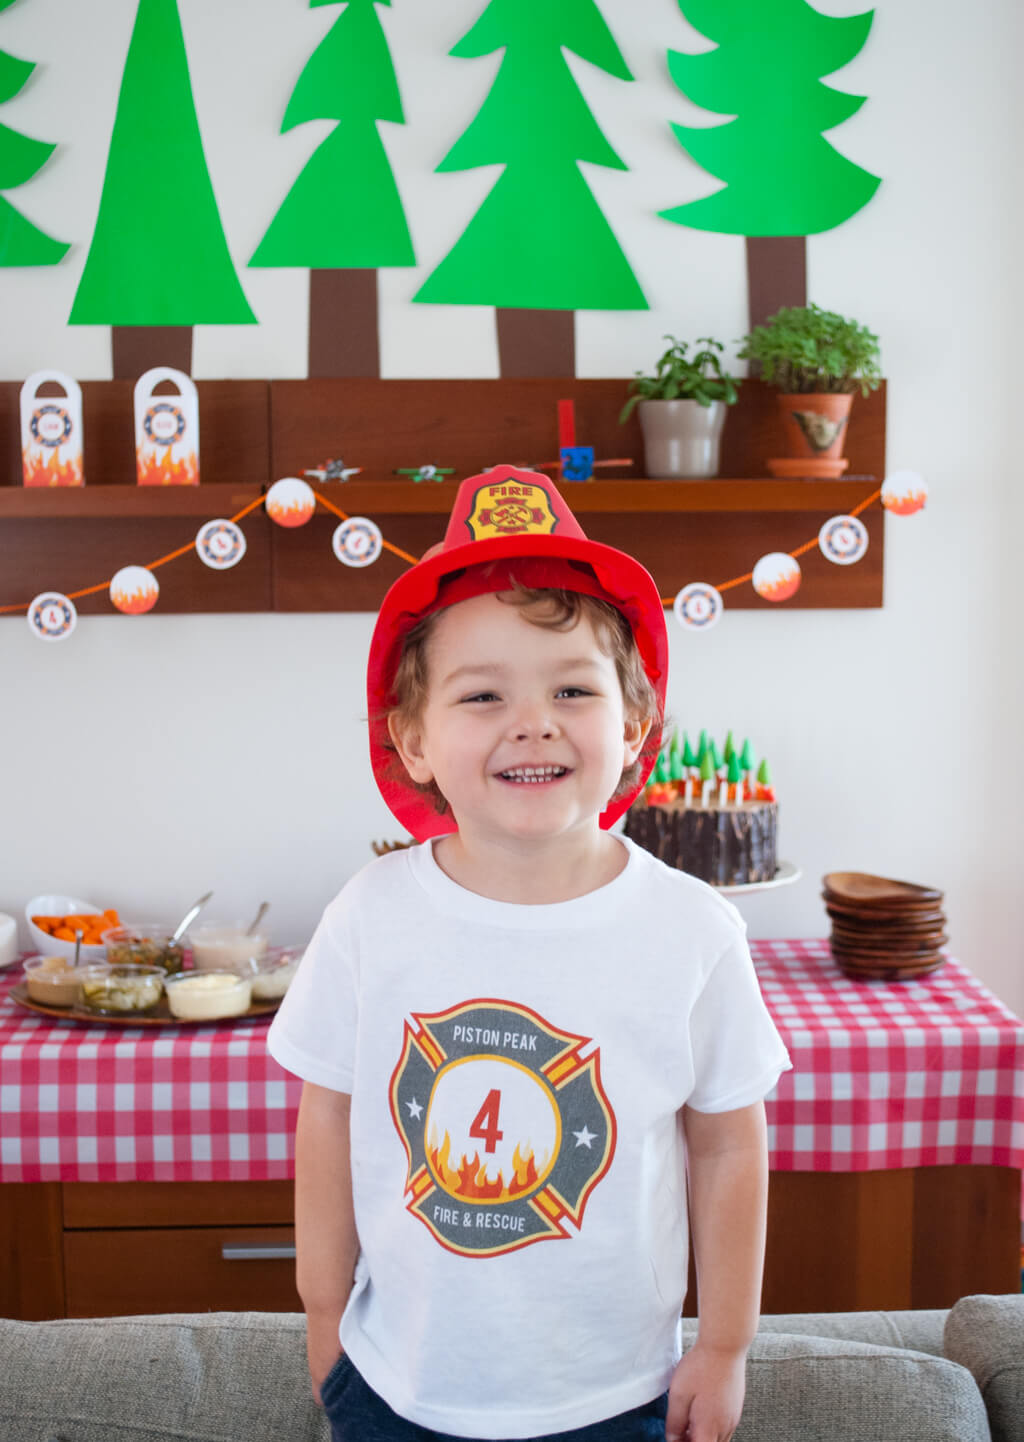 Fireman birthday party decorations and birthday party t-shirt